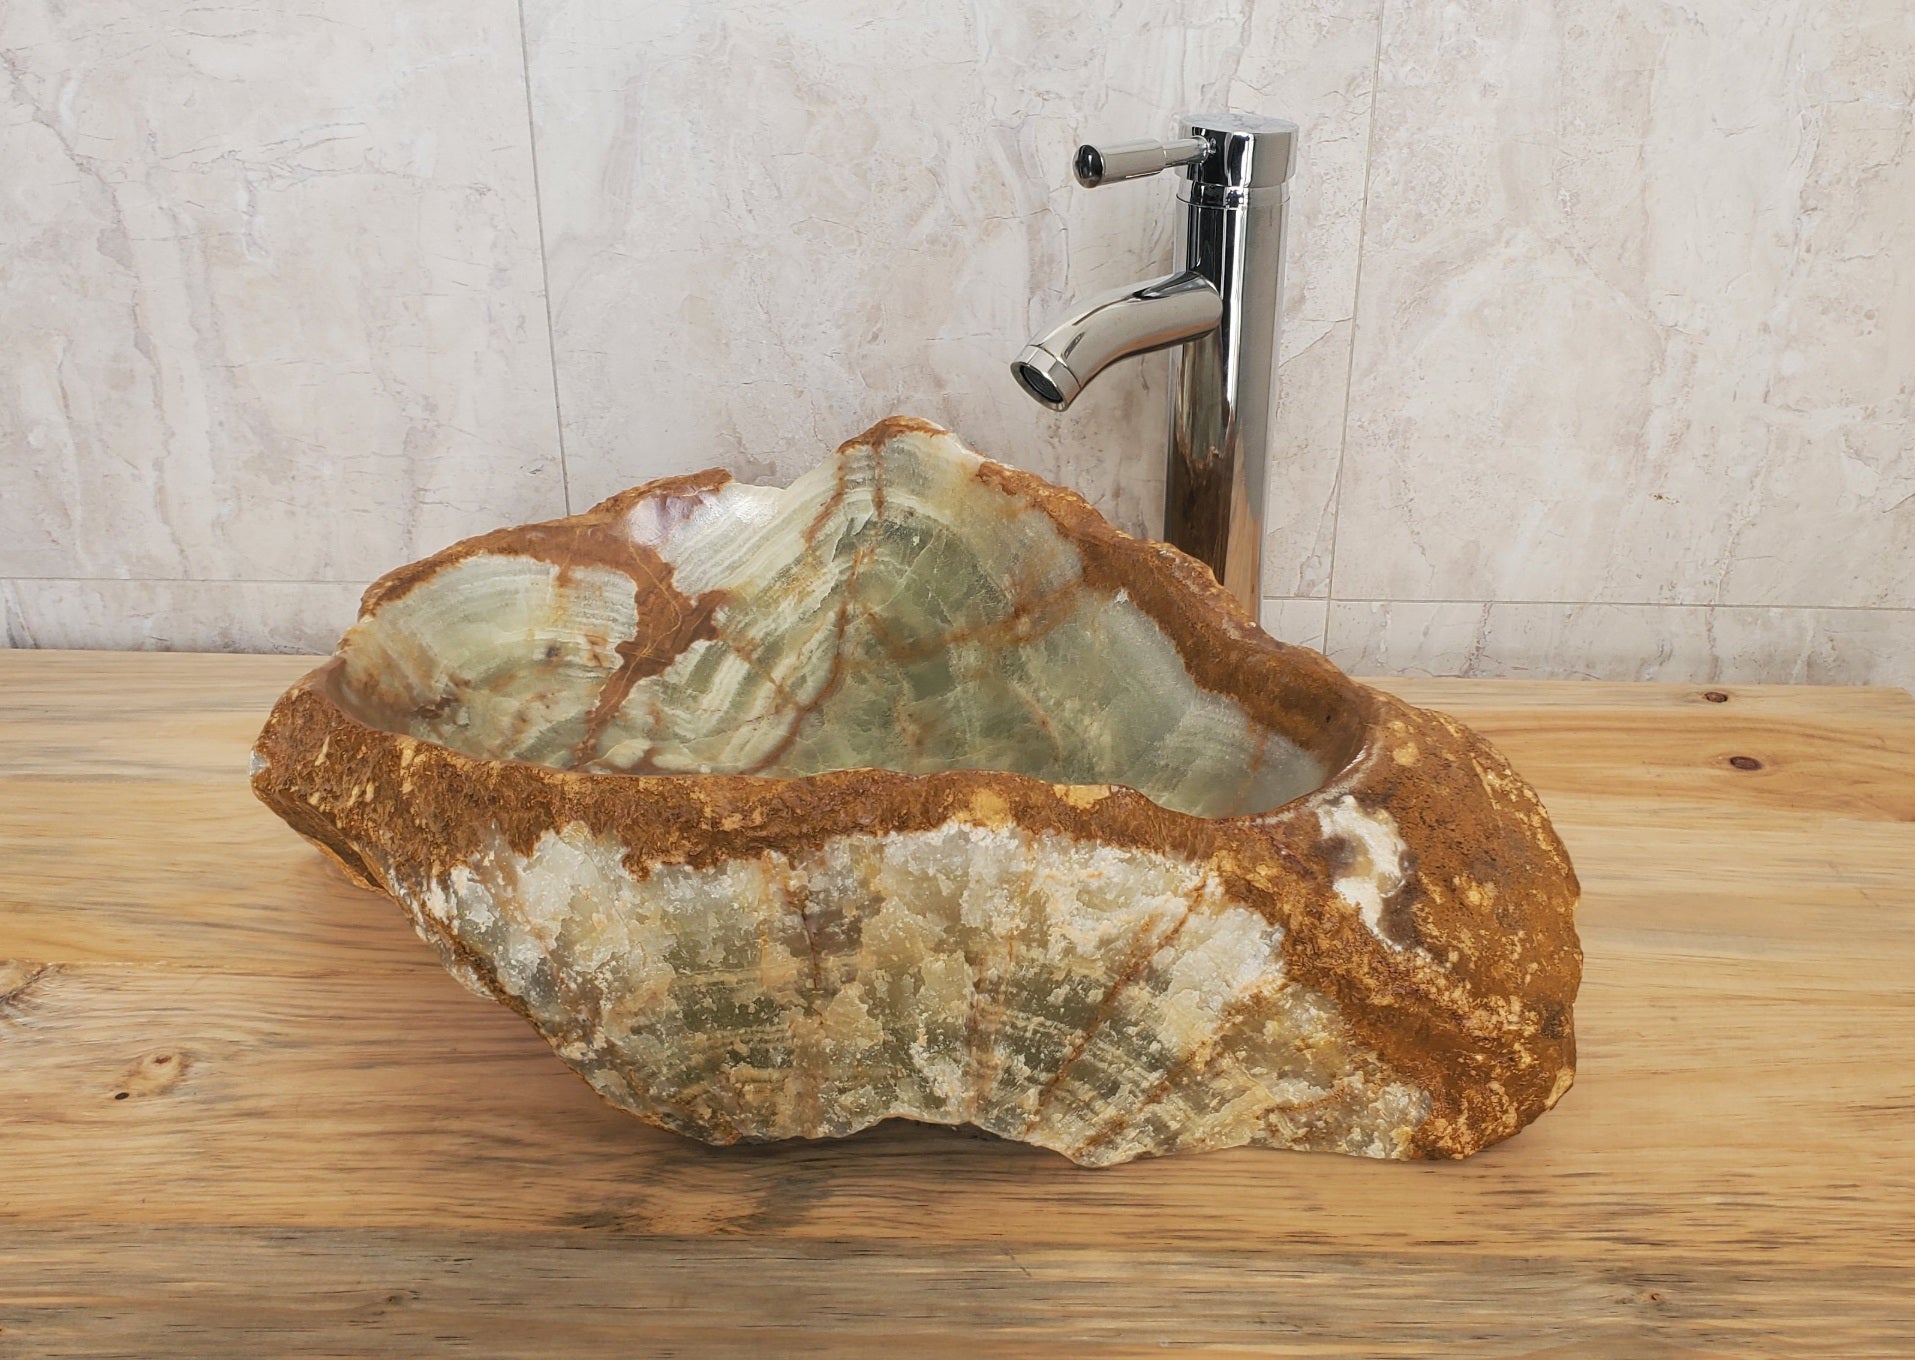  Green Onyx Stone Bathroom Vessel Sink. Epoxy Sealant is available with fast shipping. Standard drain size. A beautiful work of art. Handmade. Buy Now at www.felipeandgrace.com.